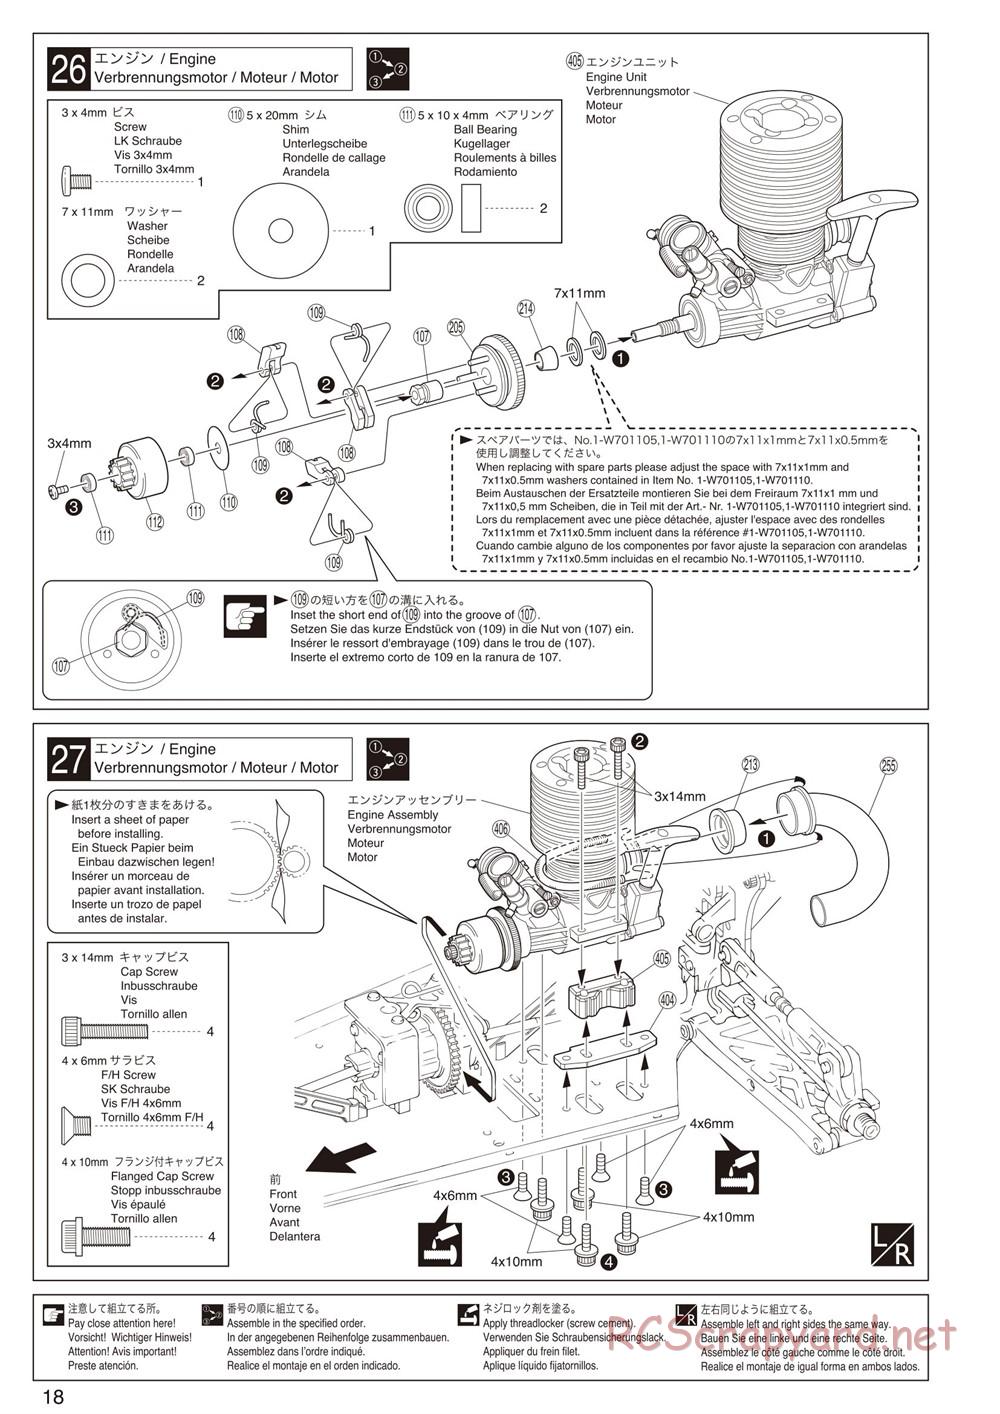 Kyosho - Inferno Neo 2.0 - Manual - Page 18